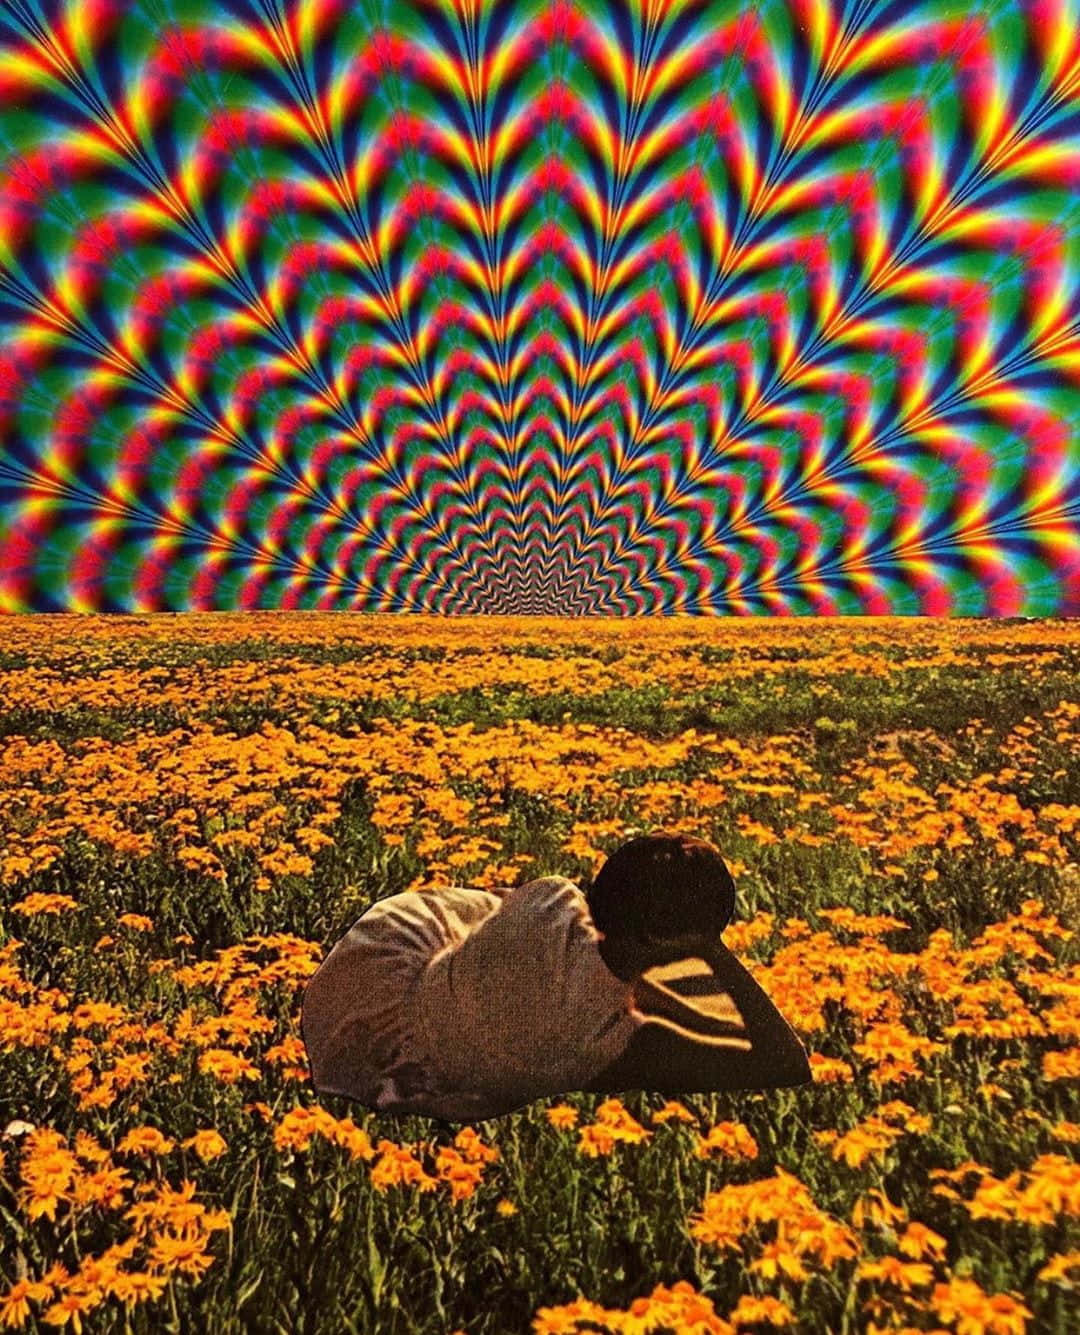 Surreal Trip through a Colorful Psychedelic Landscape Wallpaper